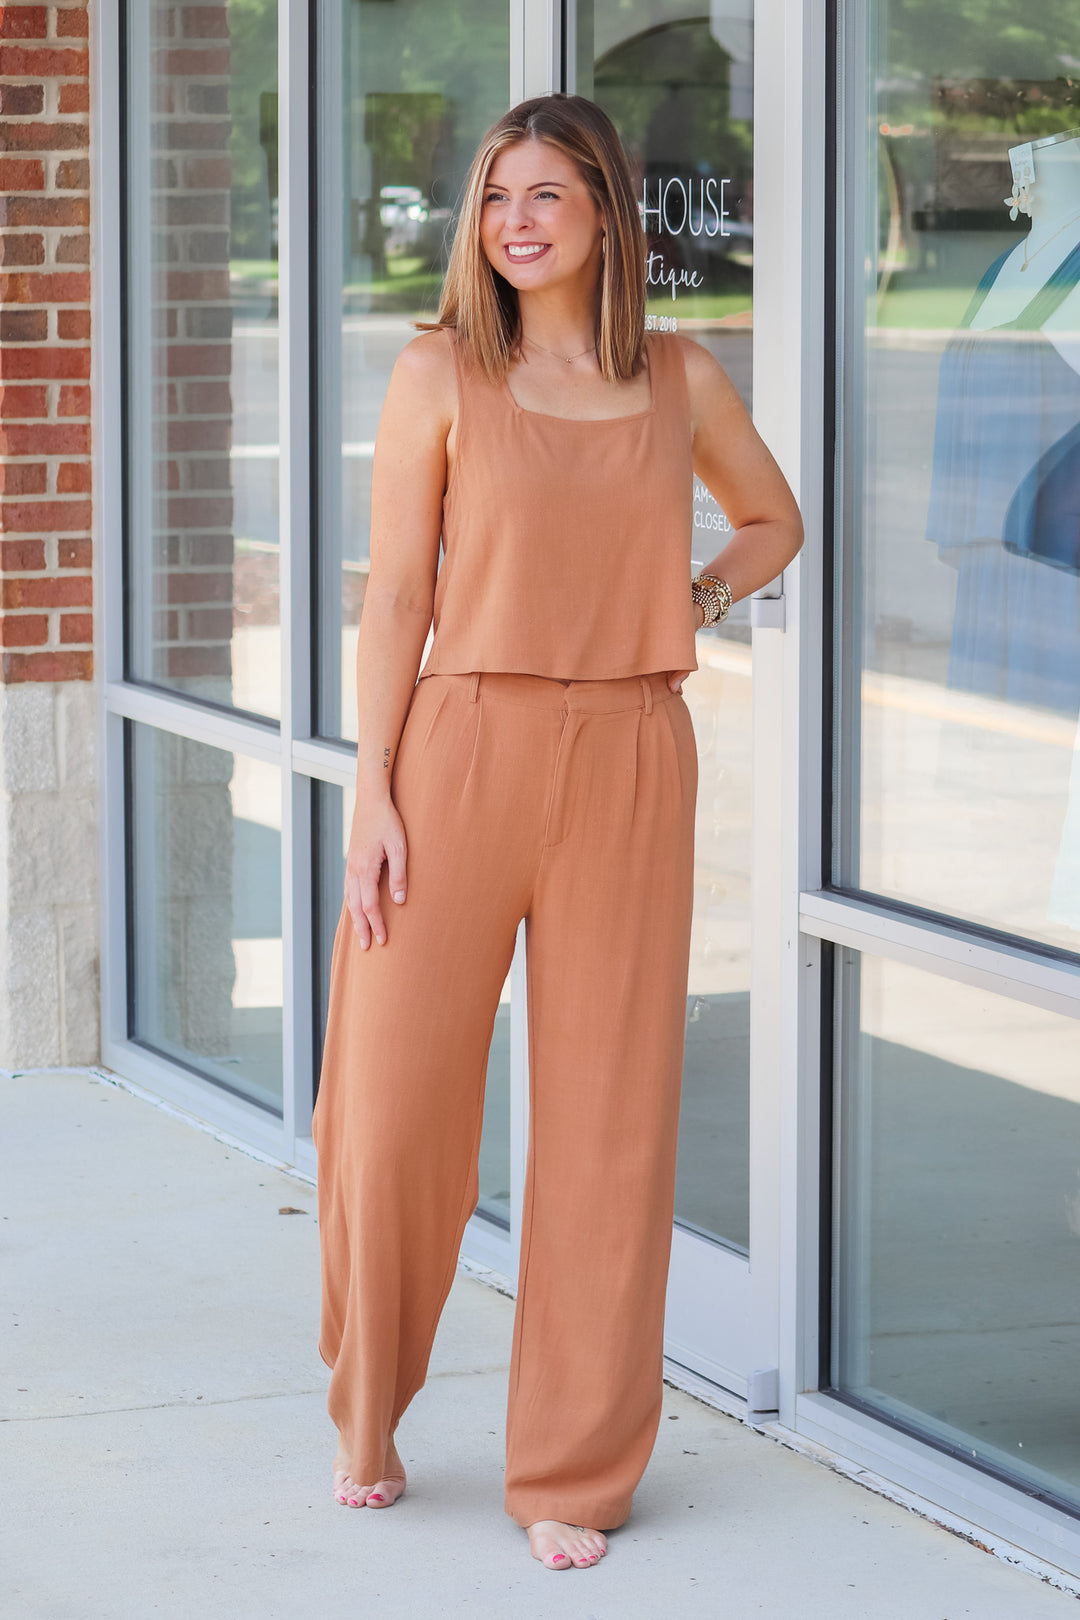 A woman wearing a tan top and tan linen pants with belt loops and pockets. She is standing in front of s shop.